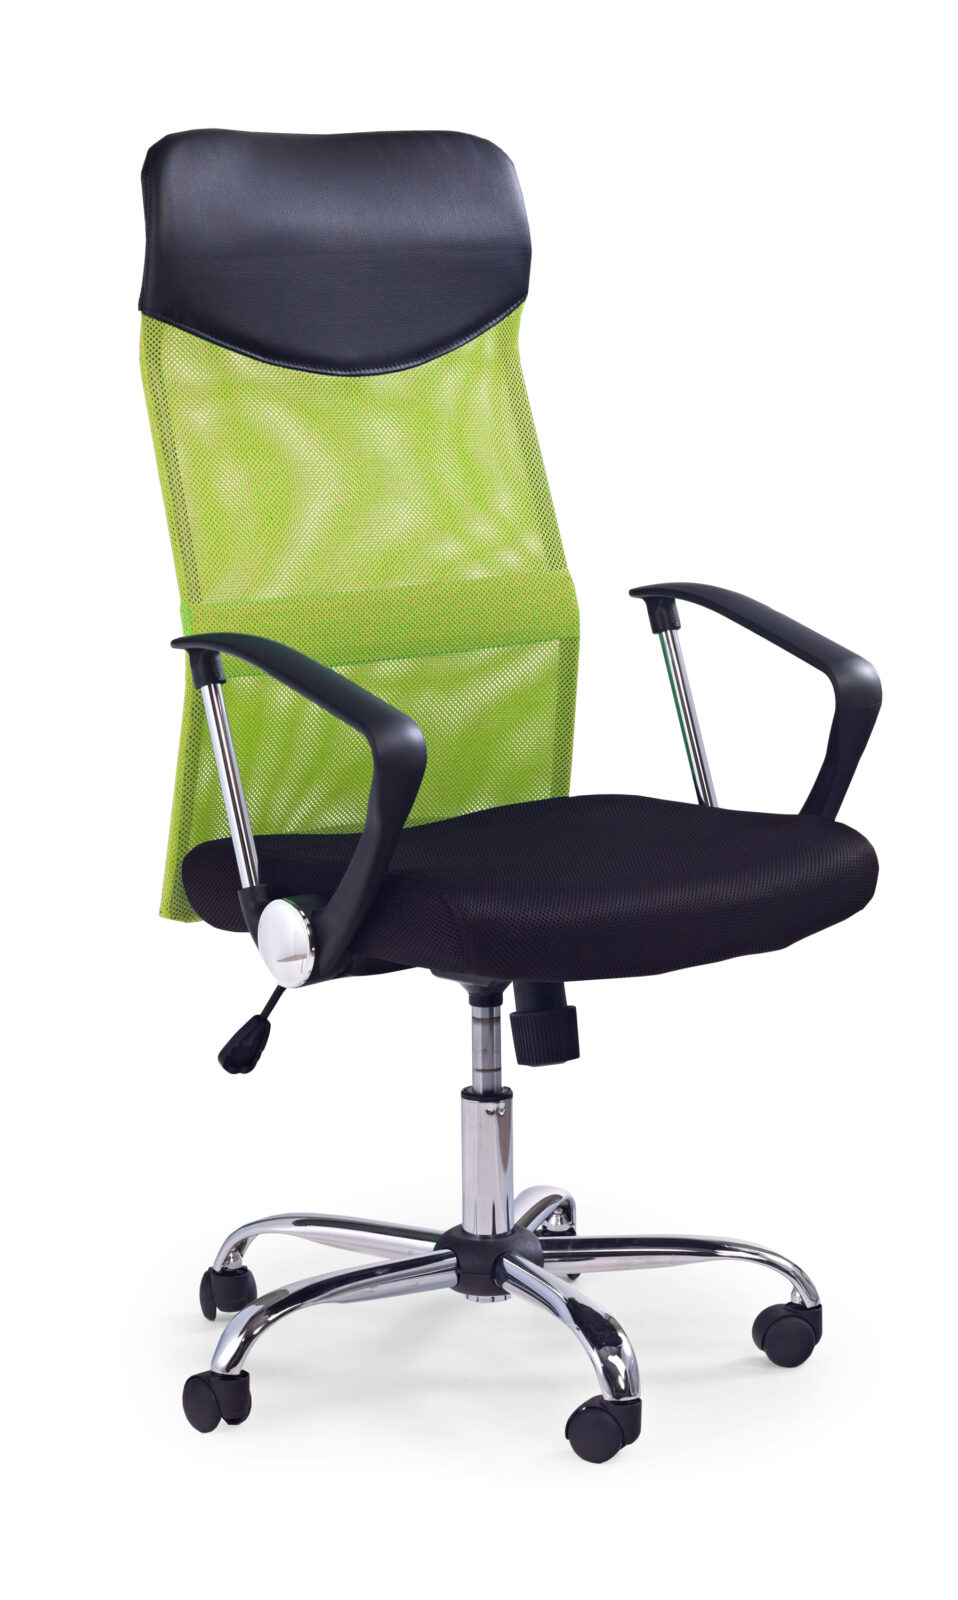 VIRE chair color: green DIOMMI V-CH-VIRE-FOT-ZIELONY